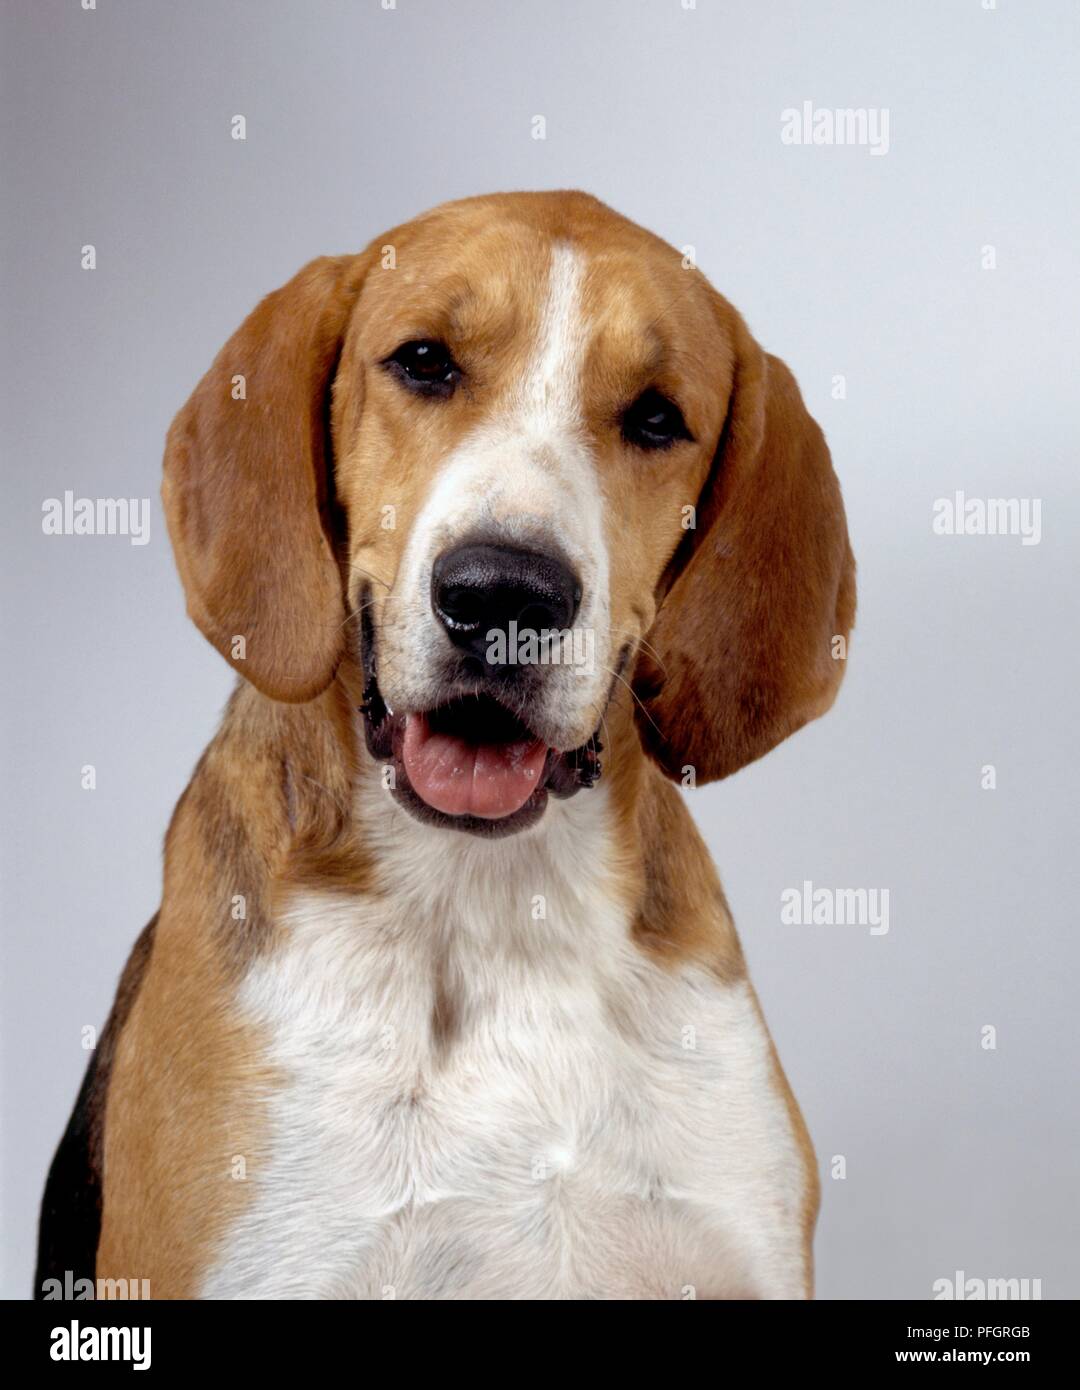 Grand Anglo Francais Tricolore Dog Looking At Camera Close Up Stock Photo Alamy